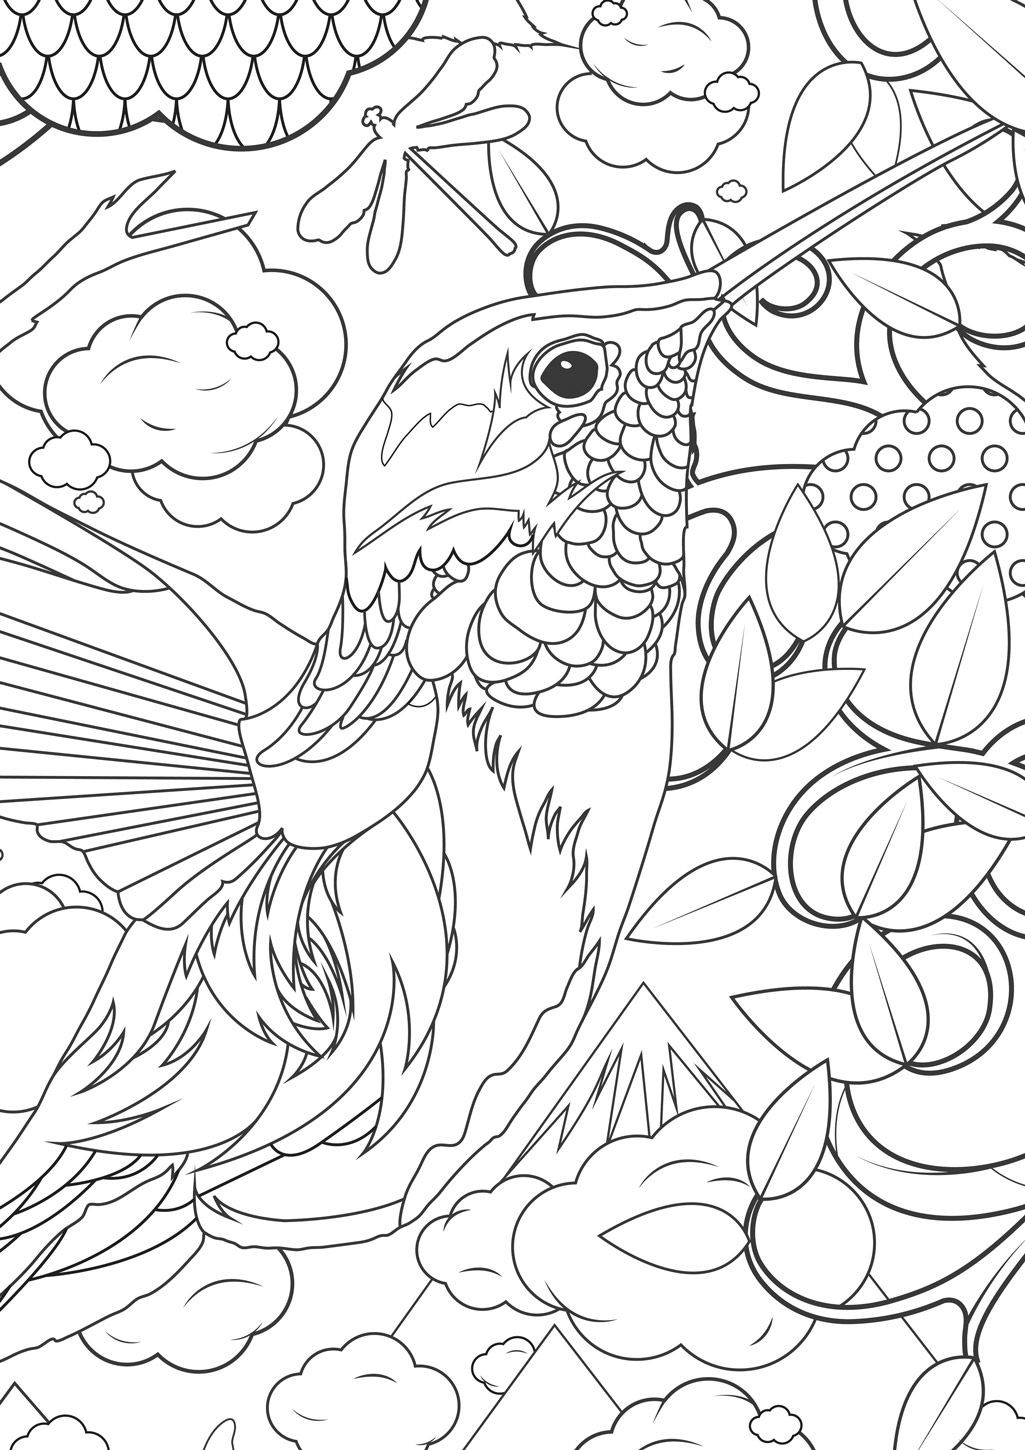 Coloring Pages For Adults Difficult Animals
 Animal Coloring Pages For Adults Difficult animals